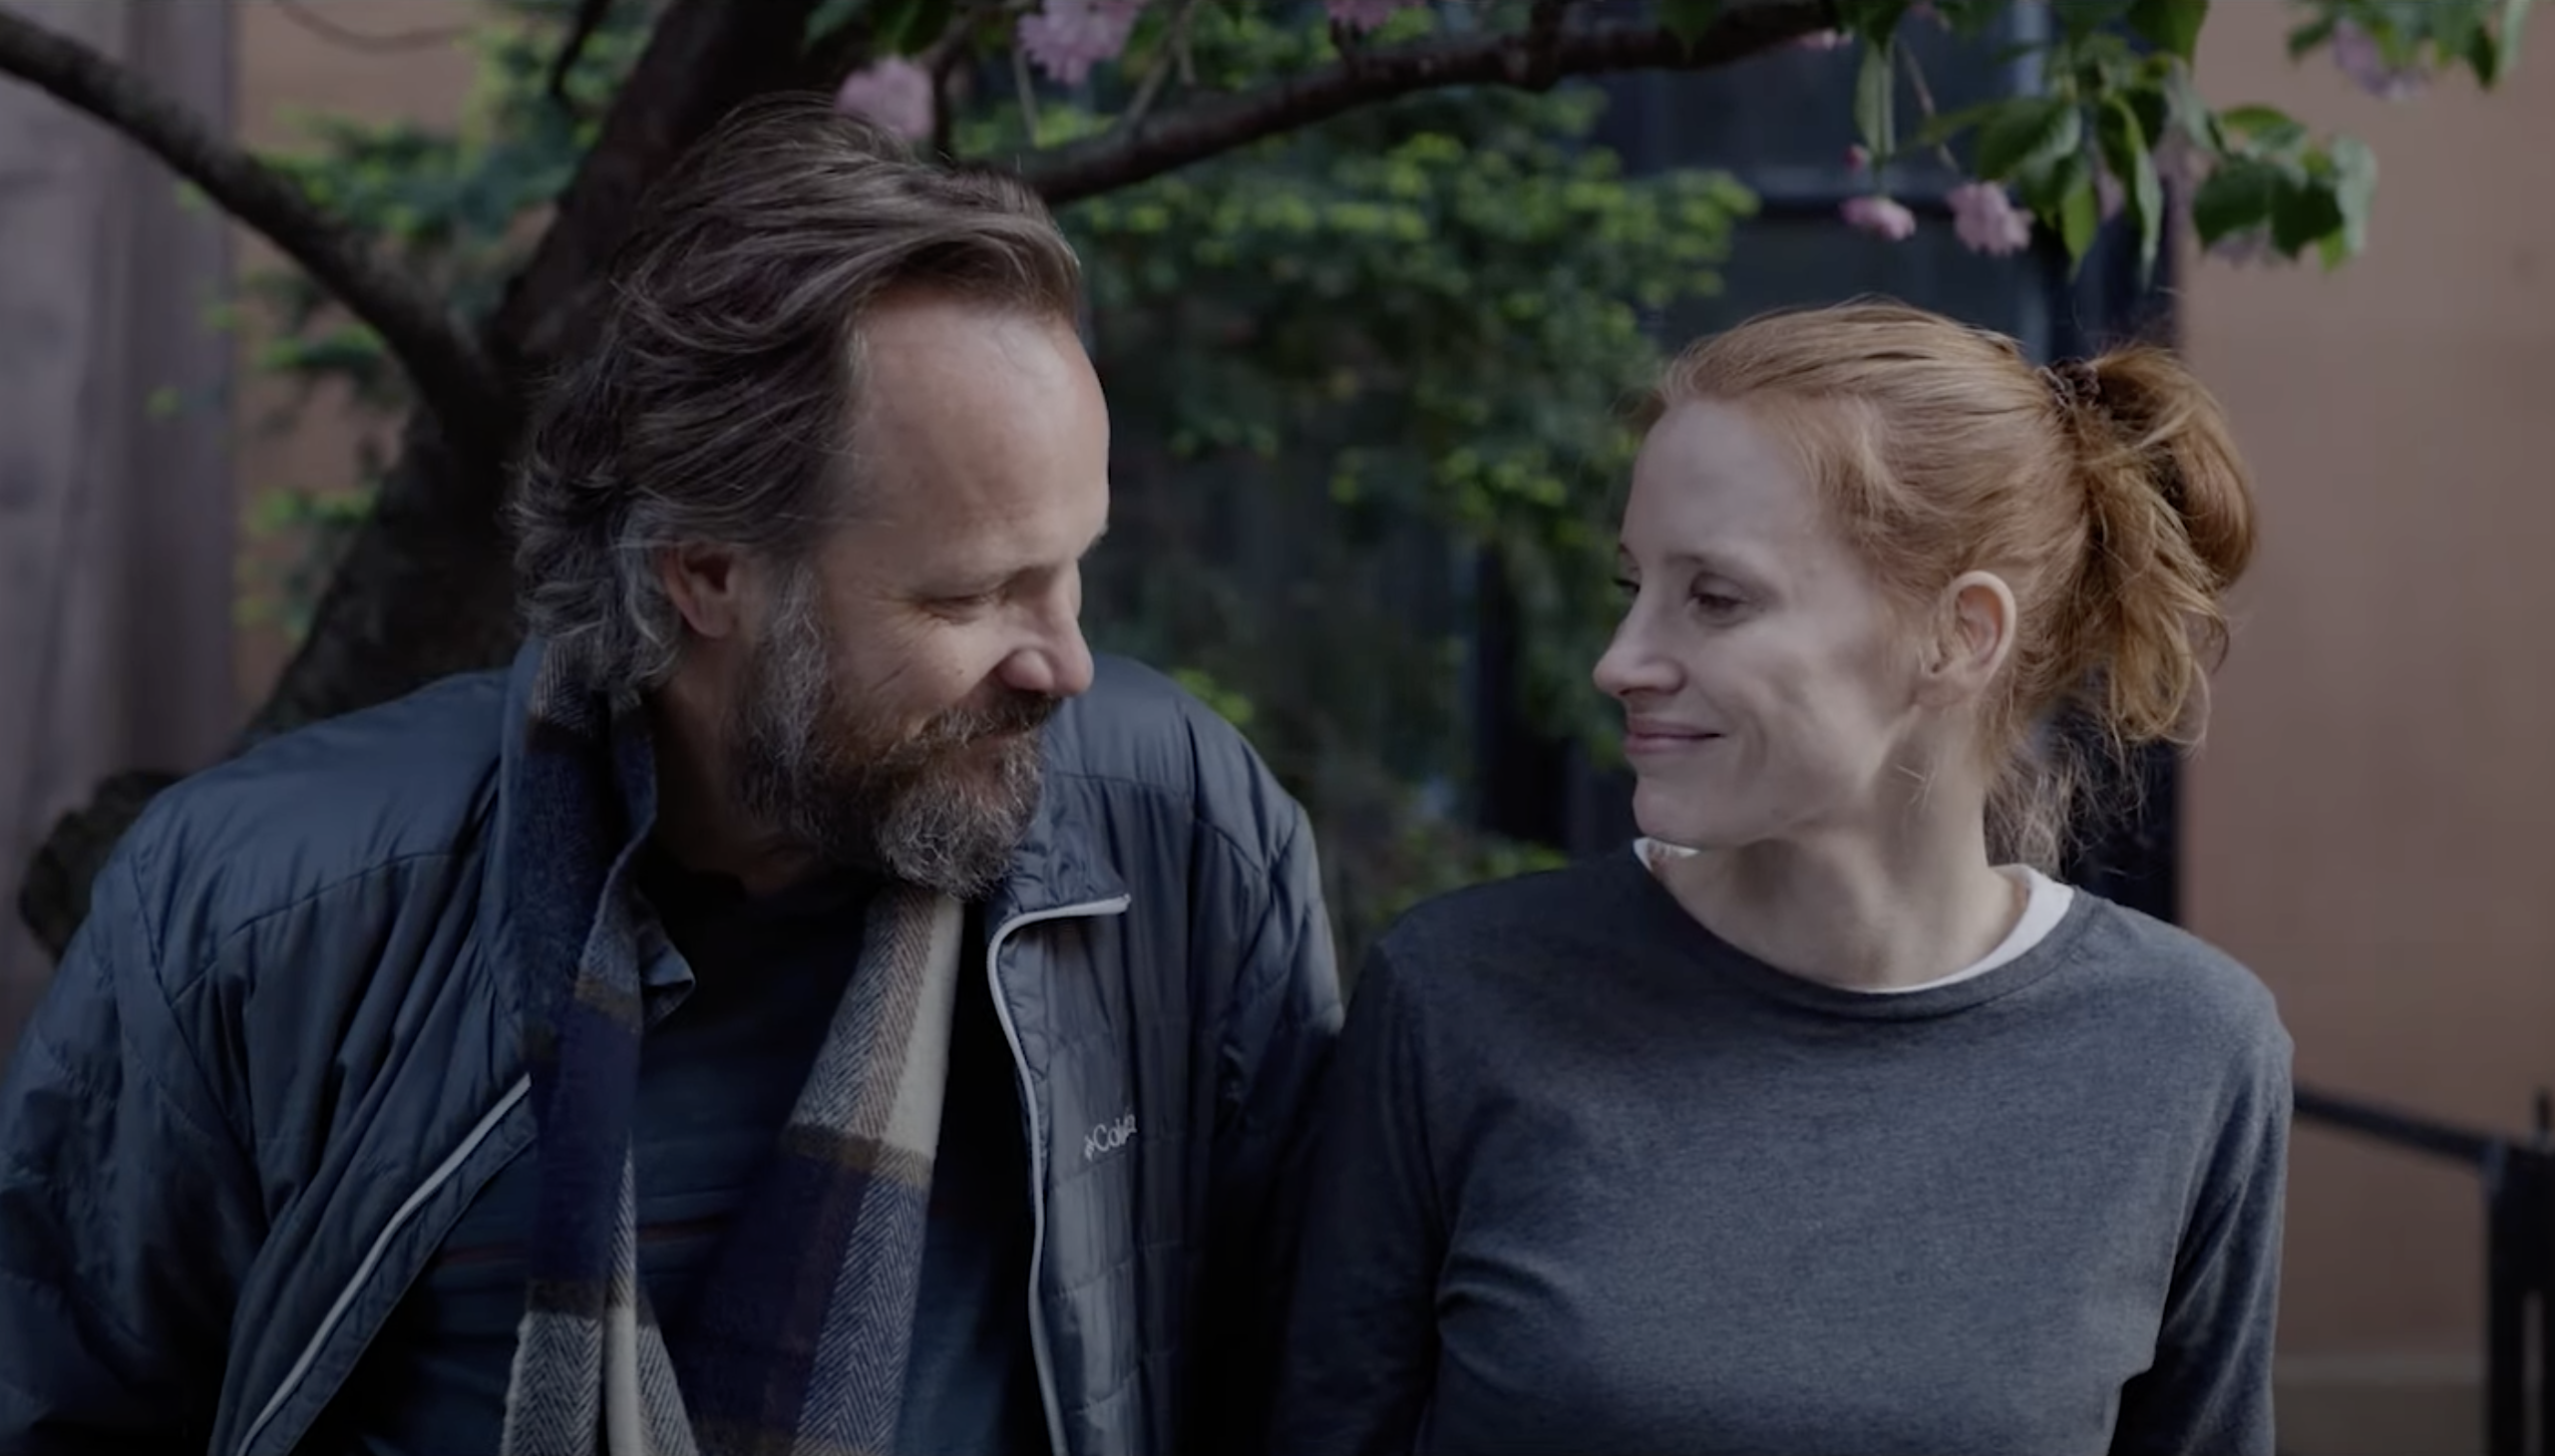 MEMORY Trailer: Jessica Chastain & Peter Sarsgaard Seek a Connection in Michel Franco’s Drama